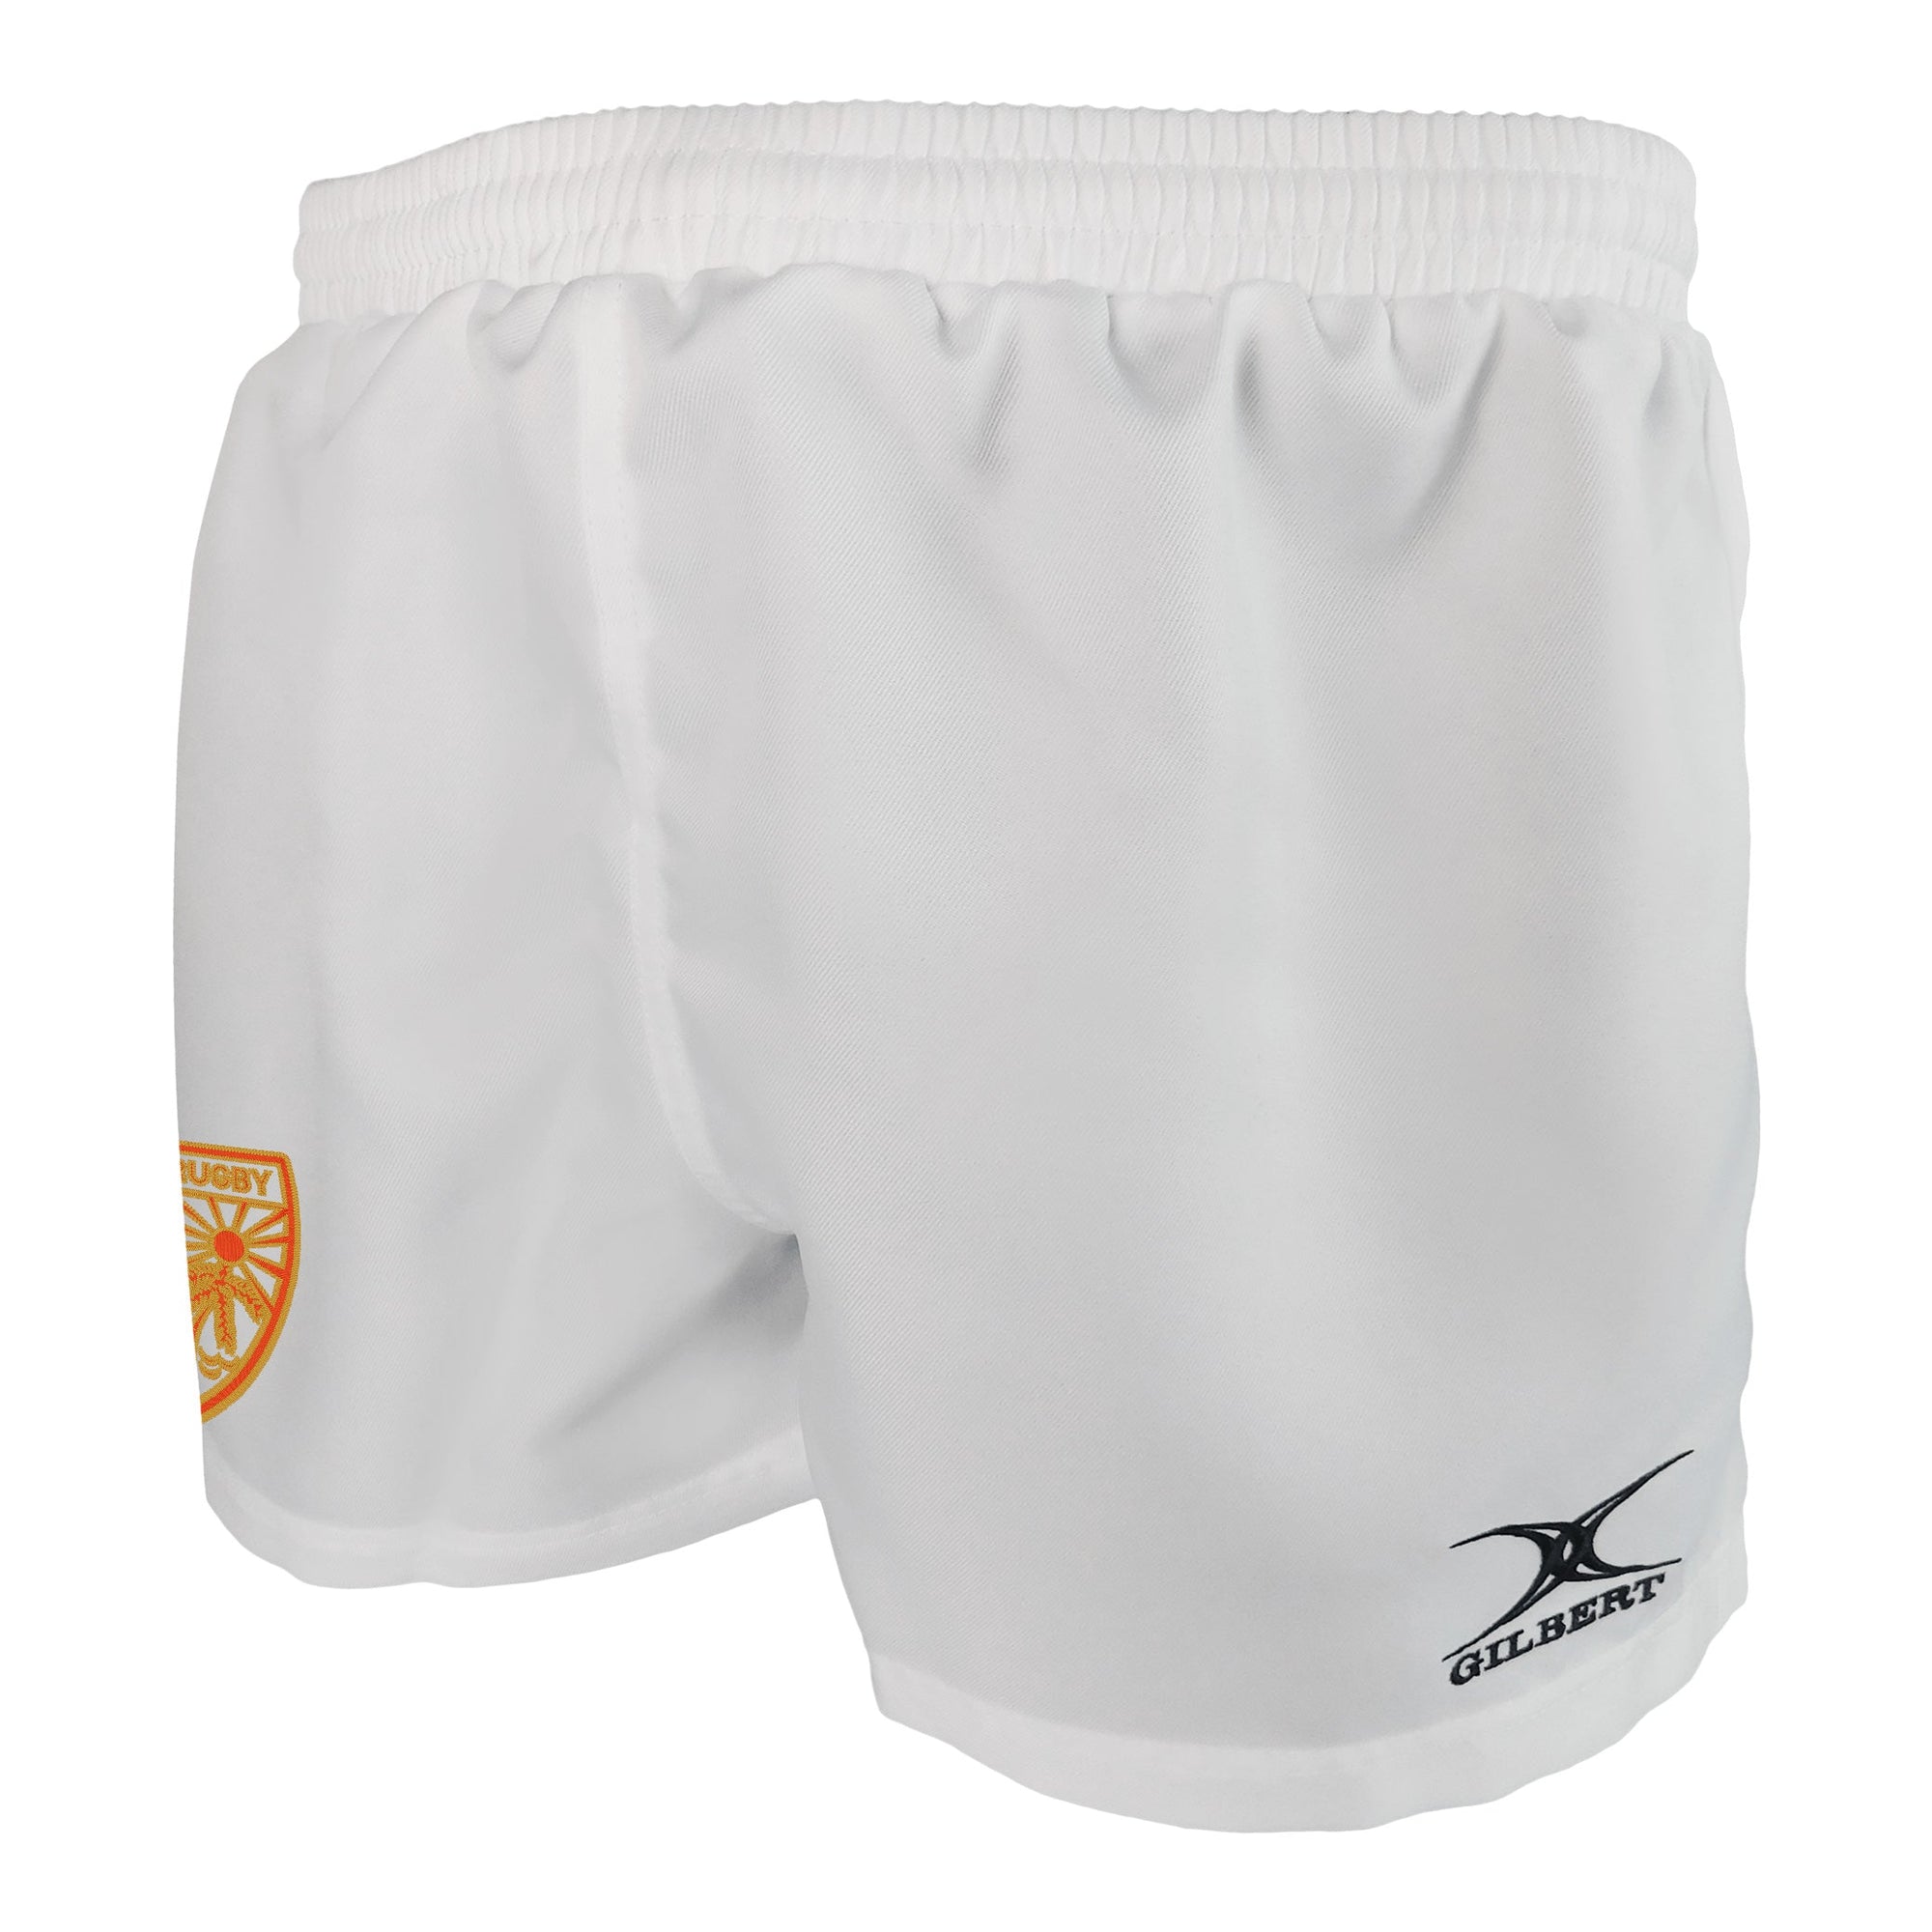 Rugby Imports UMiami Rugby Gilbert Saracen Shorts